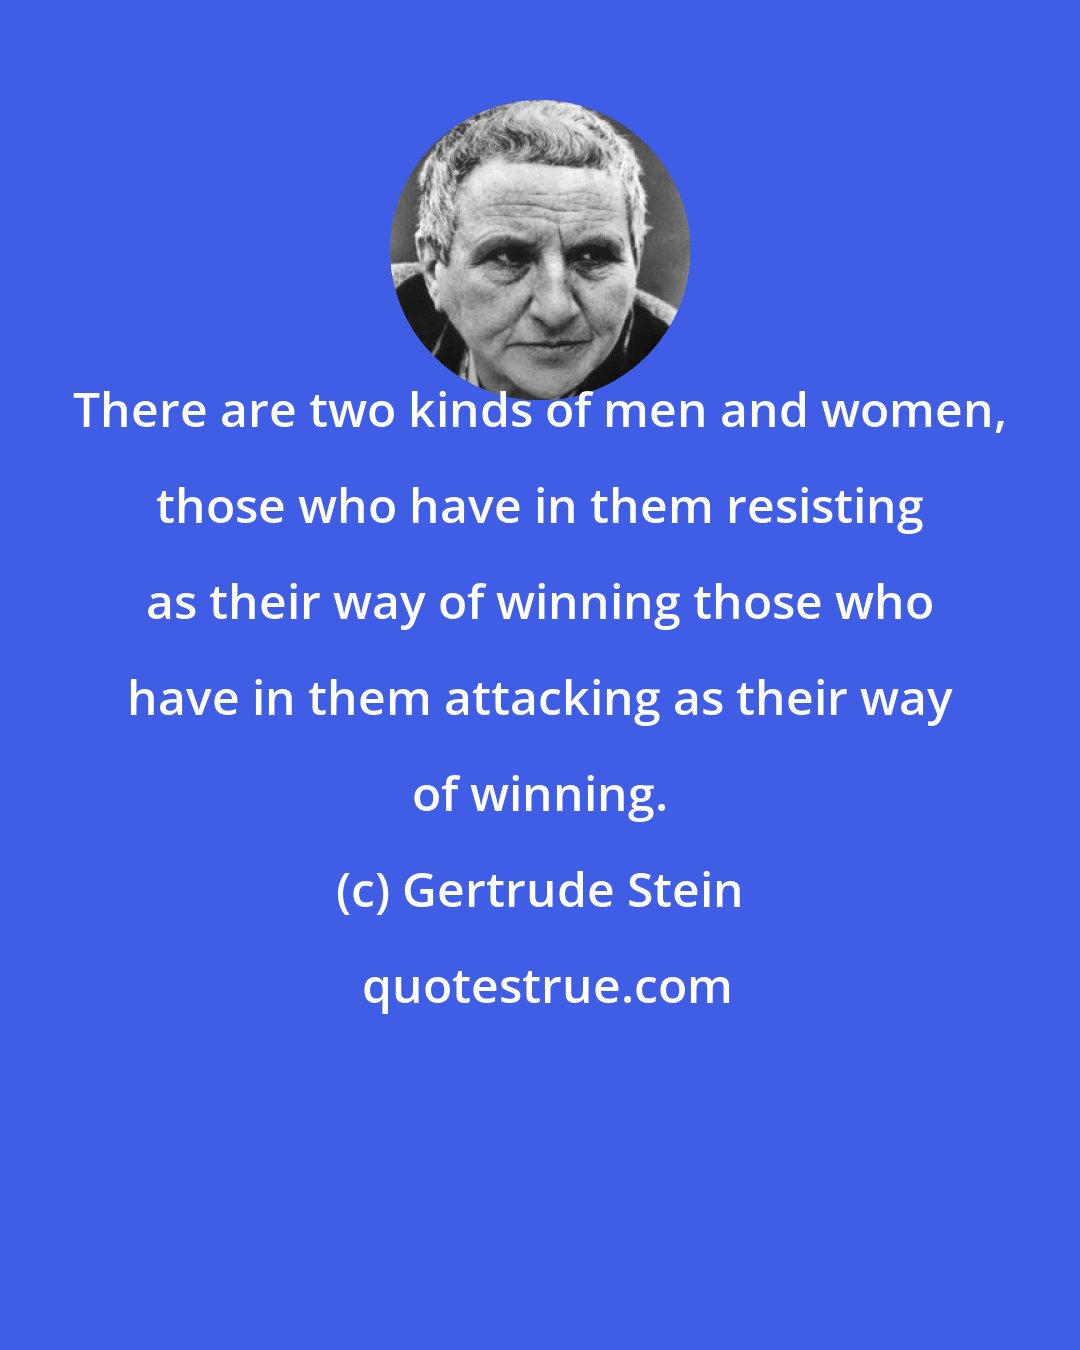 Gertrude Stein: There are two kinds of men and women, those who have in them resisting as their way of winning those who have in them attacking as their way of winning.